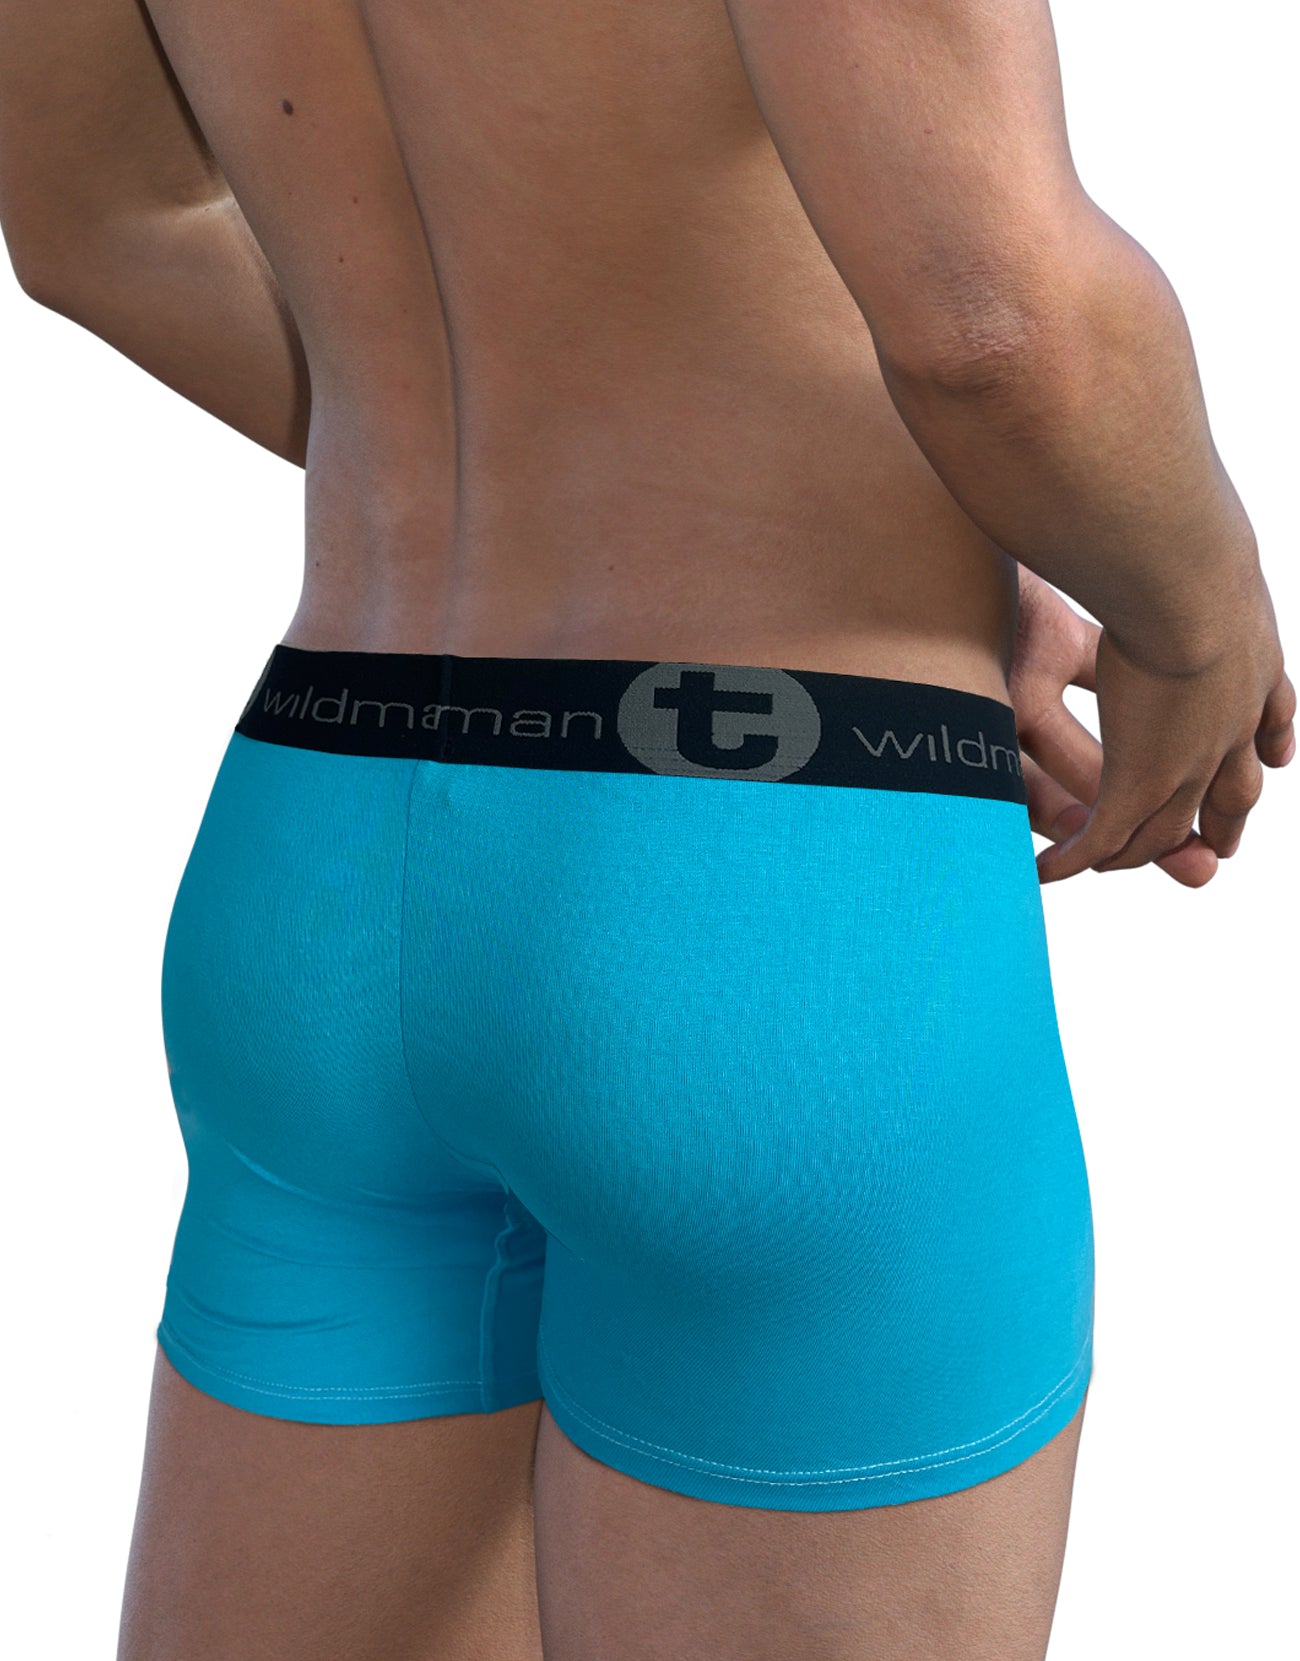  Wildmant Big Boy Pouch Brief Light Blue: Clothing, Shoes &  Jewelry